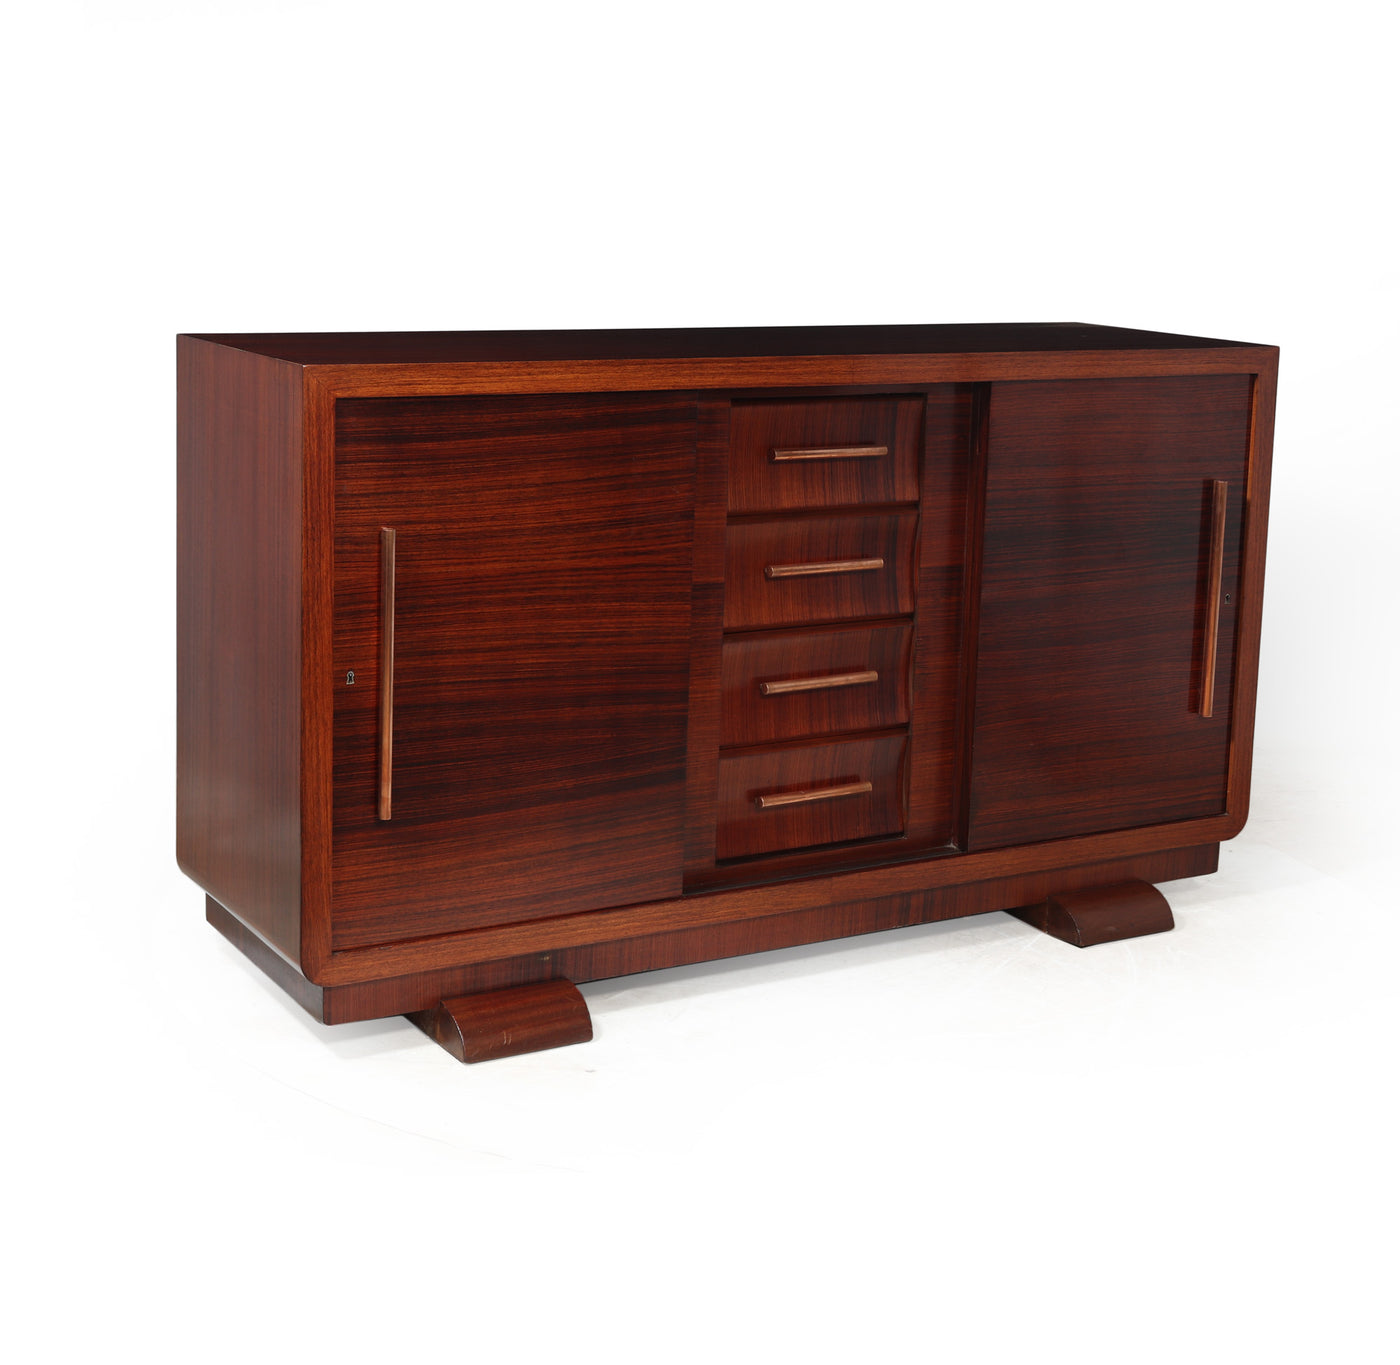 French Art Deco Sideboard with Sliding Doors side